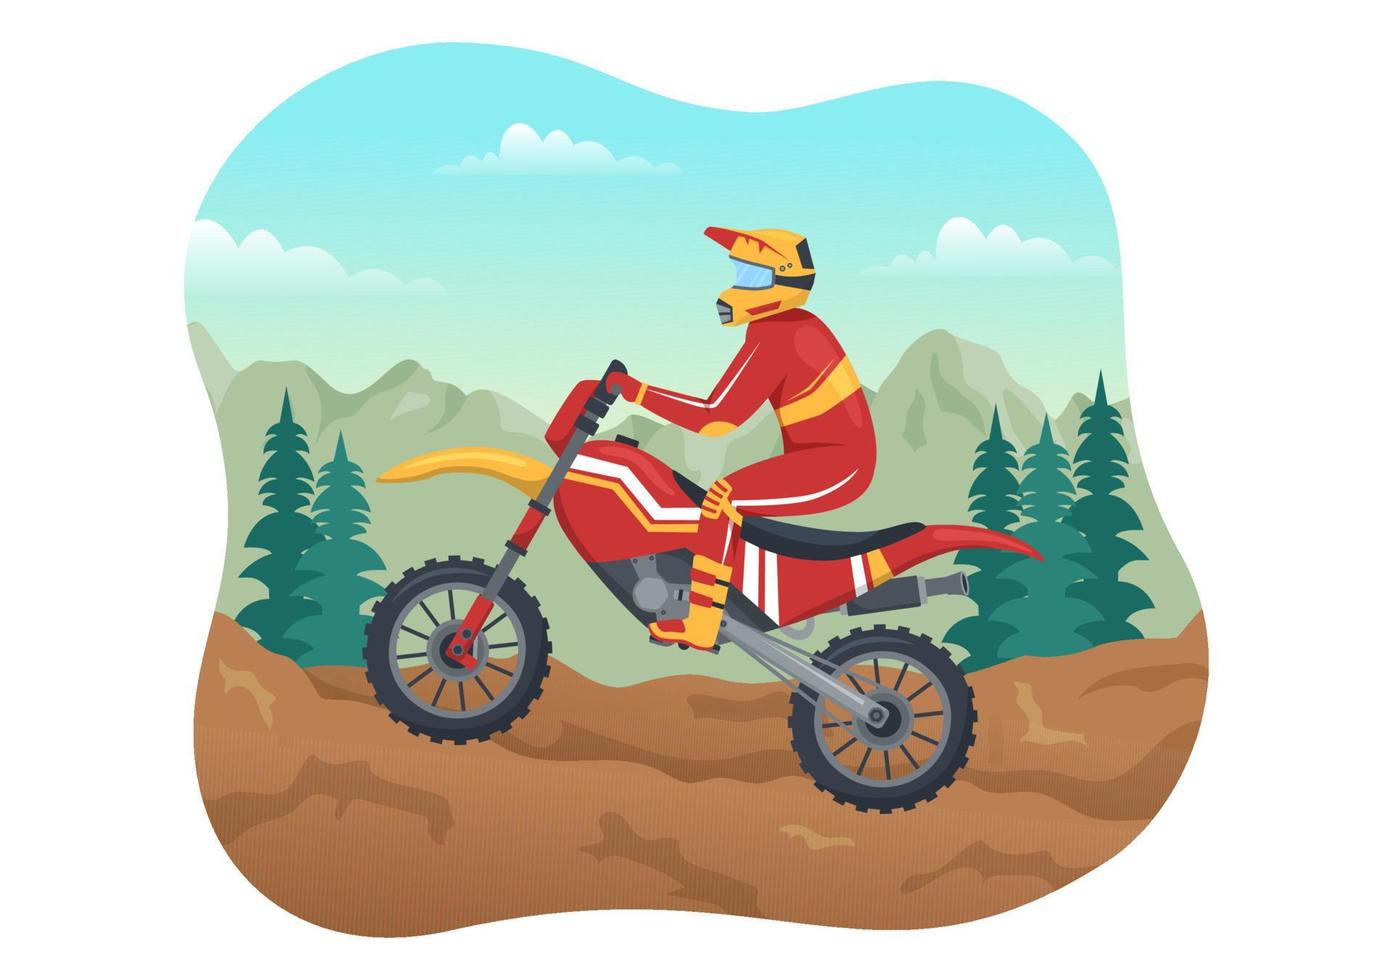 Motocross Illustration with a Rider Riding a Bike Through Mud, Rocky Roads and Adventure in Extreme Sport Flat Cartoon Hand Drawn Template vector